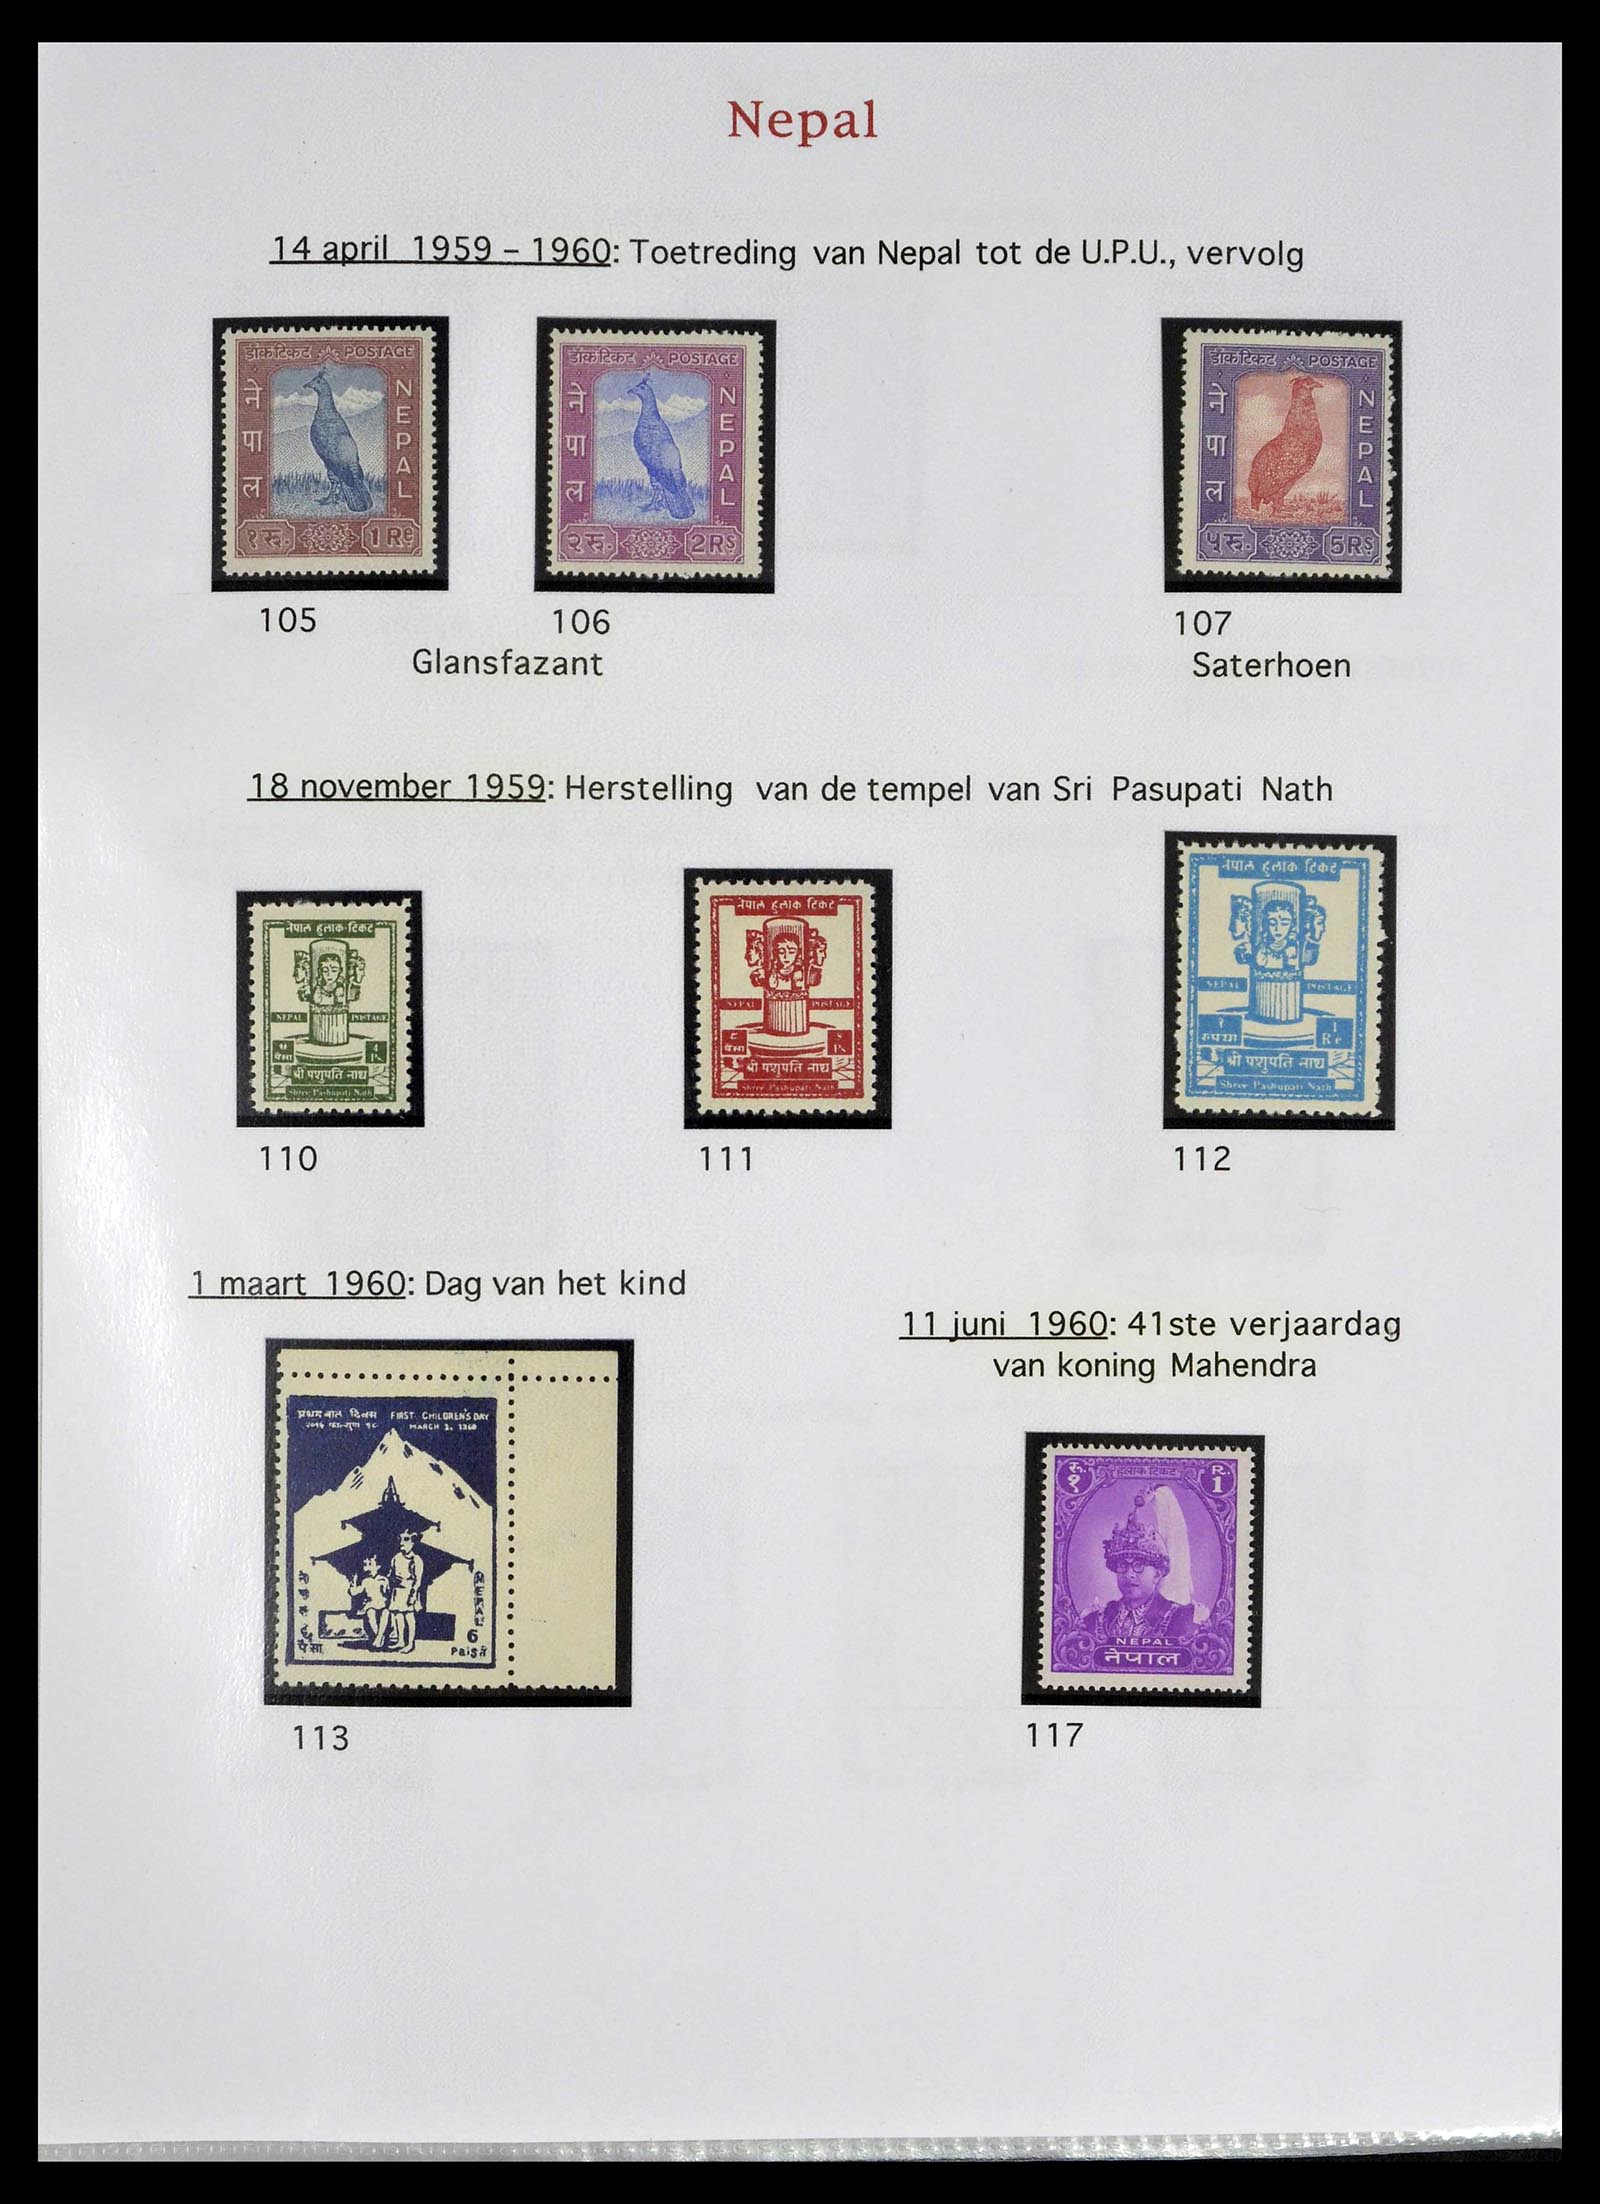 39313 0012 - Stamp collection 39313 Nepal 1881-1999.